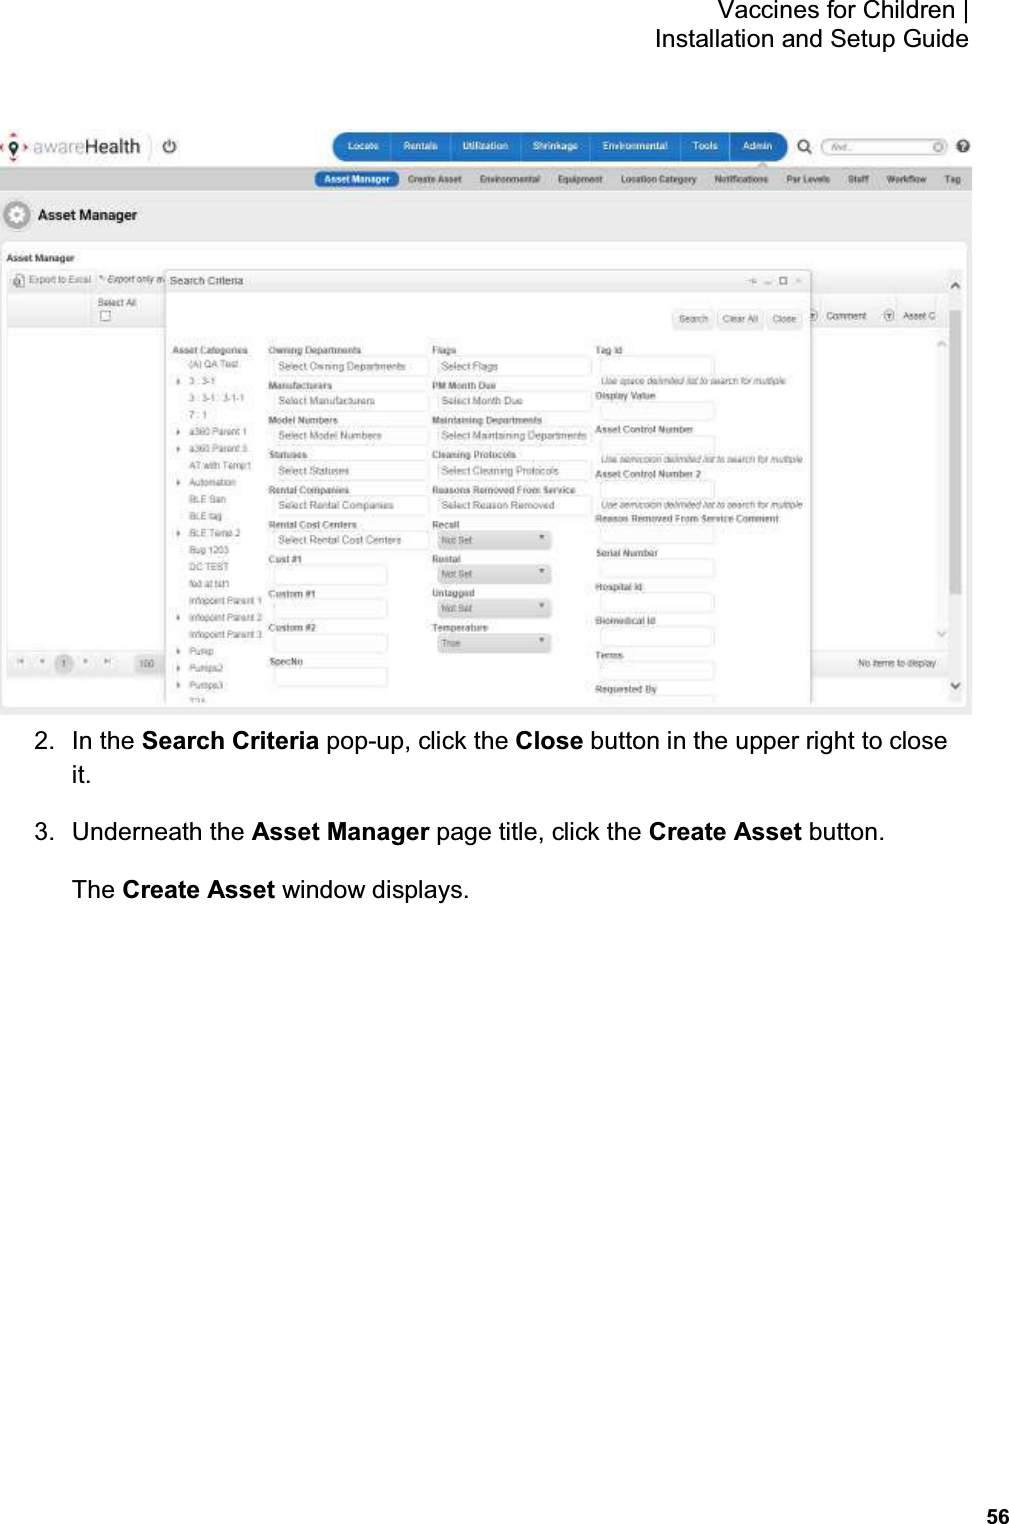           56 Vaccines for Children |  Installation and Setup Guide  2.  In the Search Criteria pop-up, click the Close button in the upper right to close it. 3.  Underneath the Asset Manager page title, click the Create Asset button. The Create Asset window displays. 